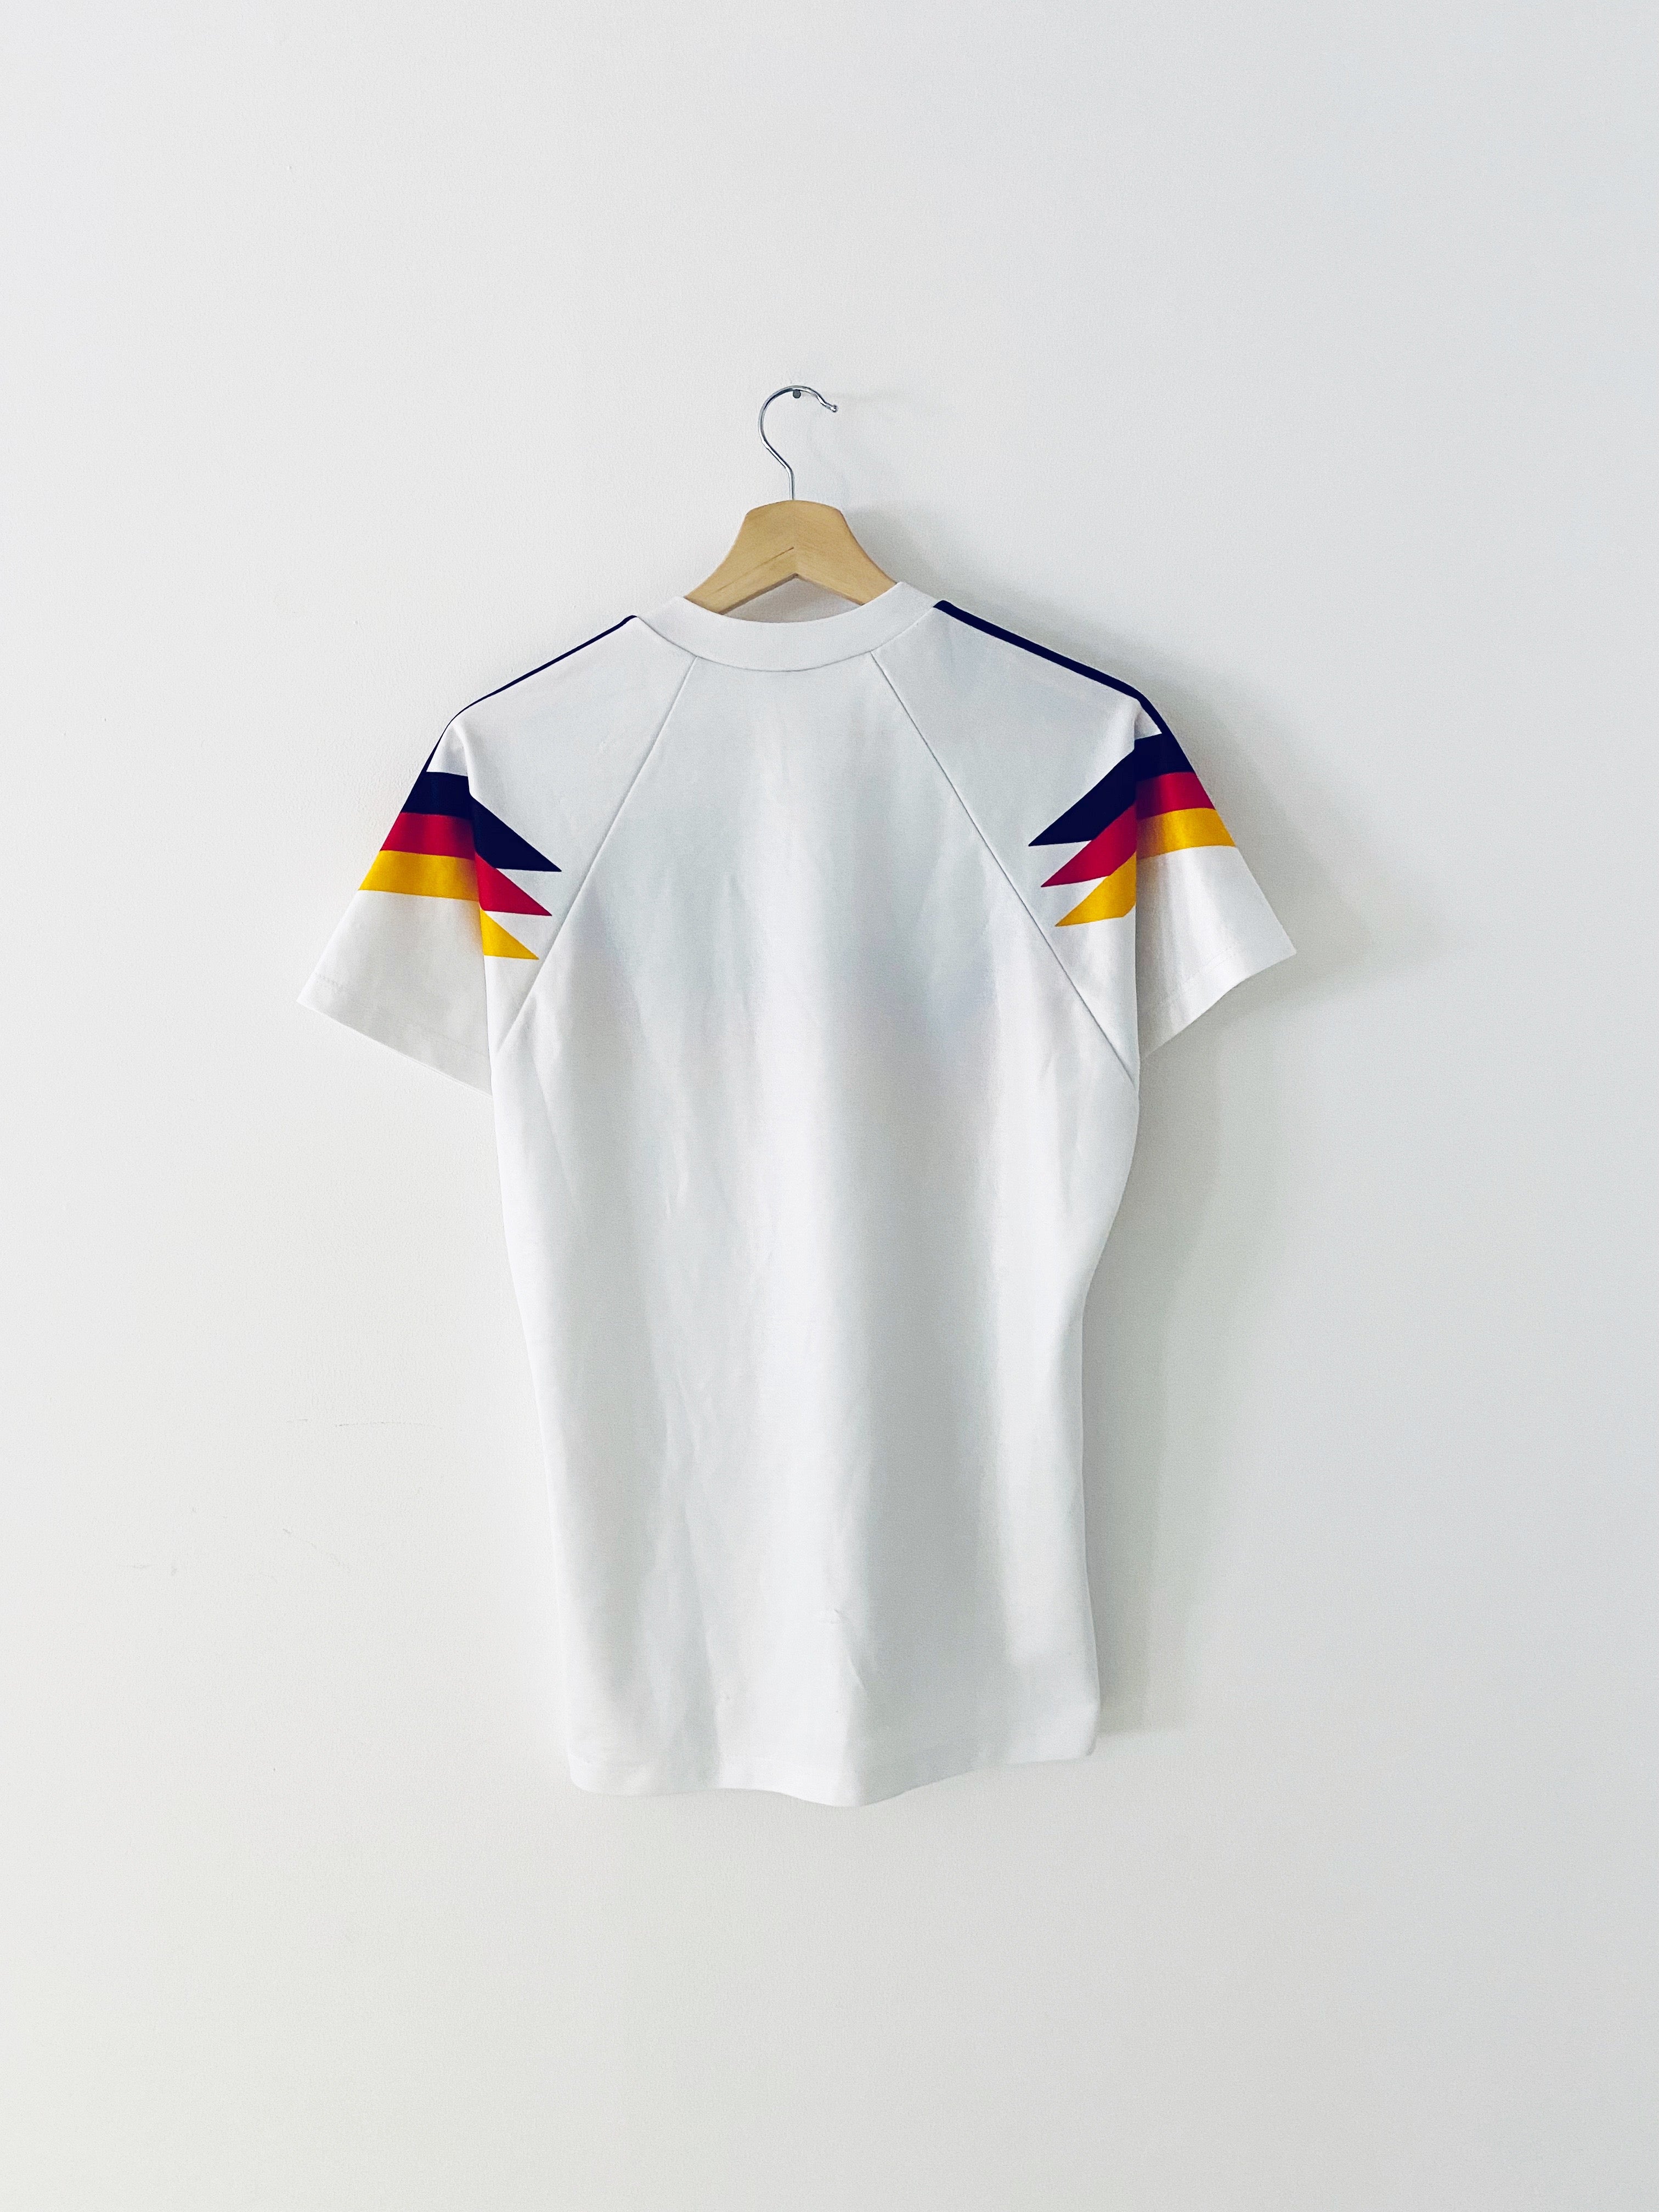 1990/92 West Germany Home Shirt (XS) 7/10